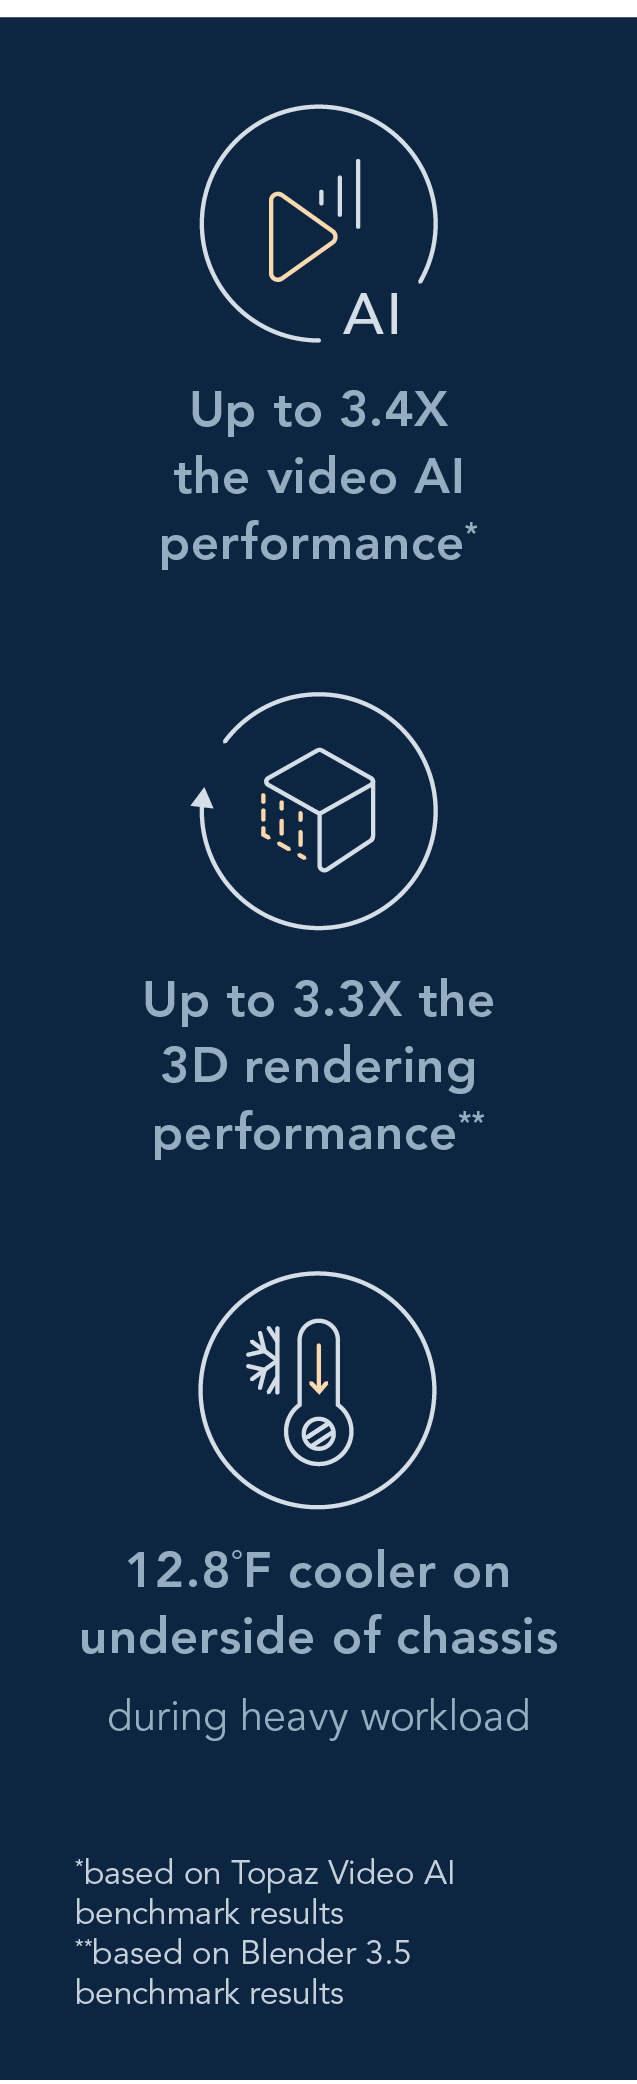 Up to 3.4X the video AI performance based on Topaz Video AI benchmark results. Up to 3.3X the 3D rendering performance based on Blender 3.5 benchmark results. 12.8˚F cooler on underside of chassis during heavy workload. 